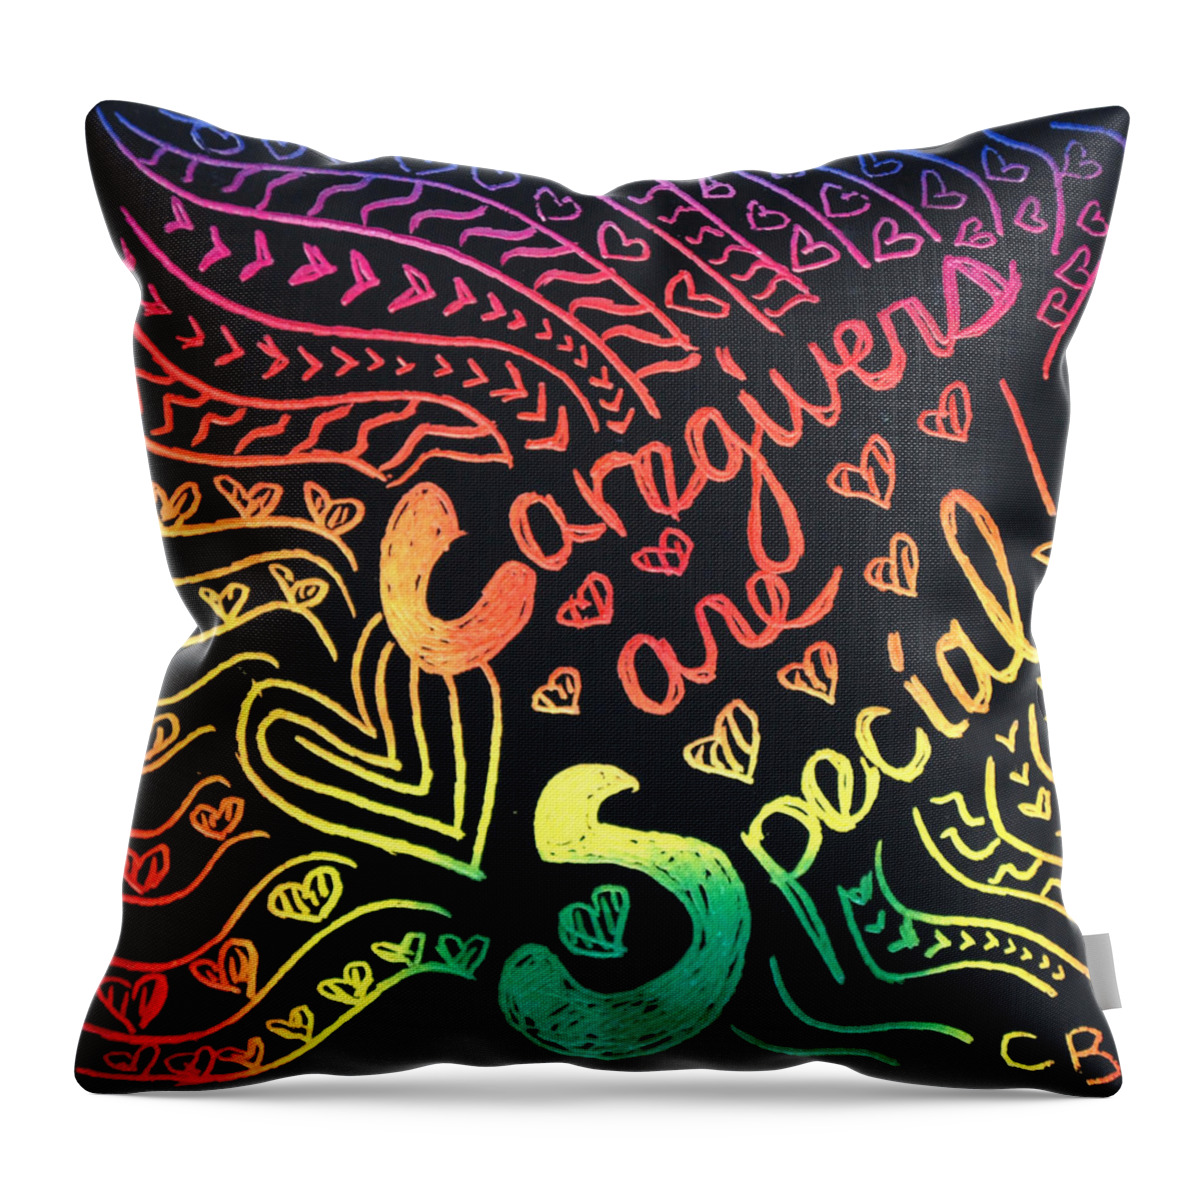 Caregiver Throw Pillow featuring the drawing Rainbows by Carole Brecht